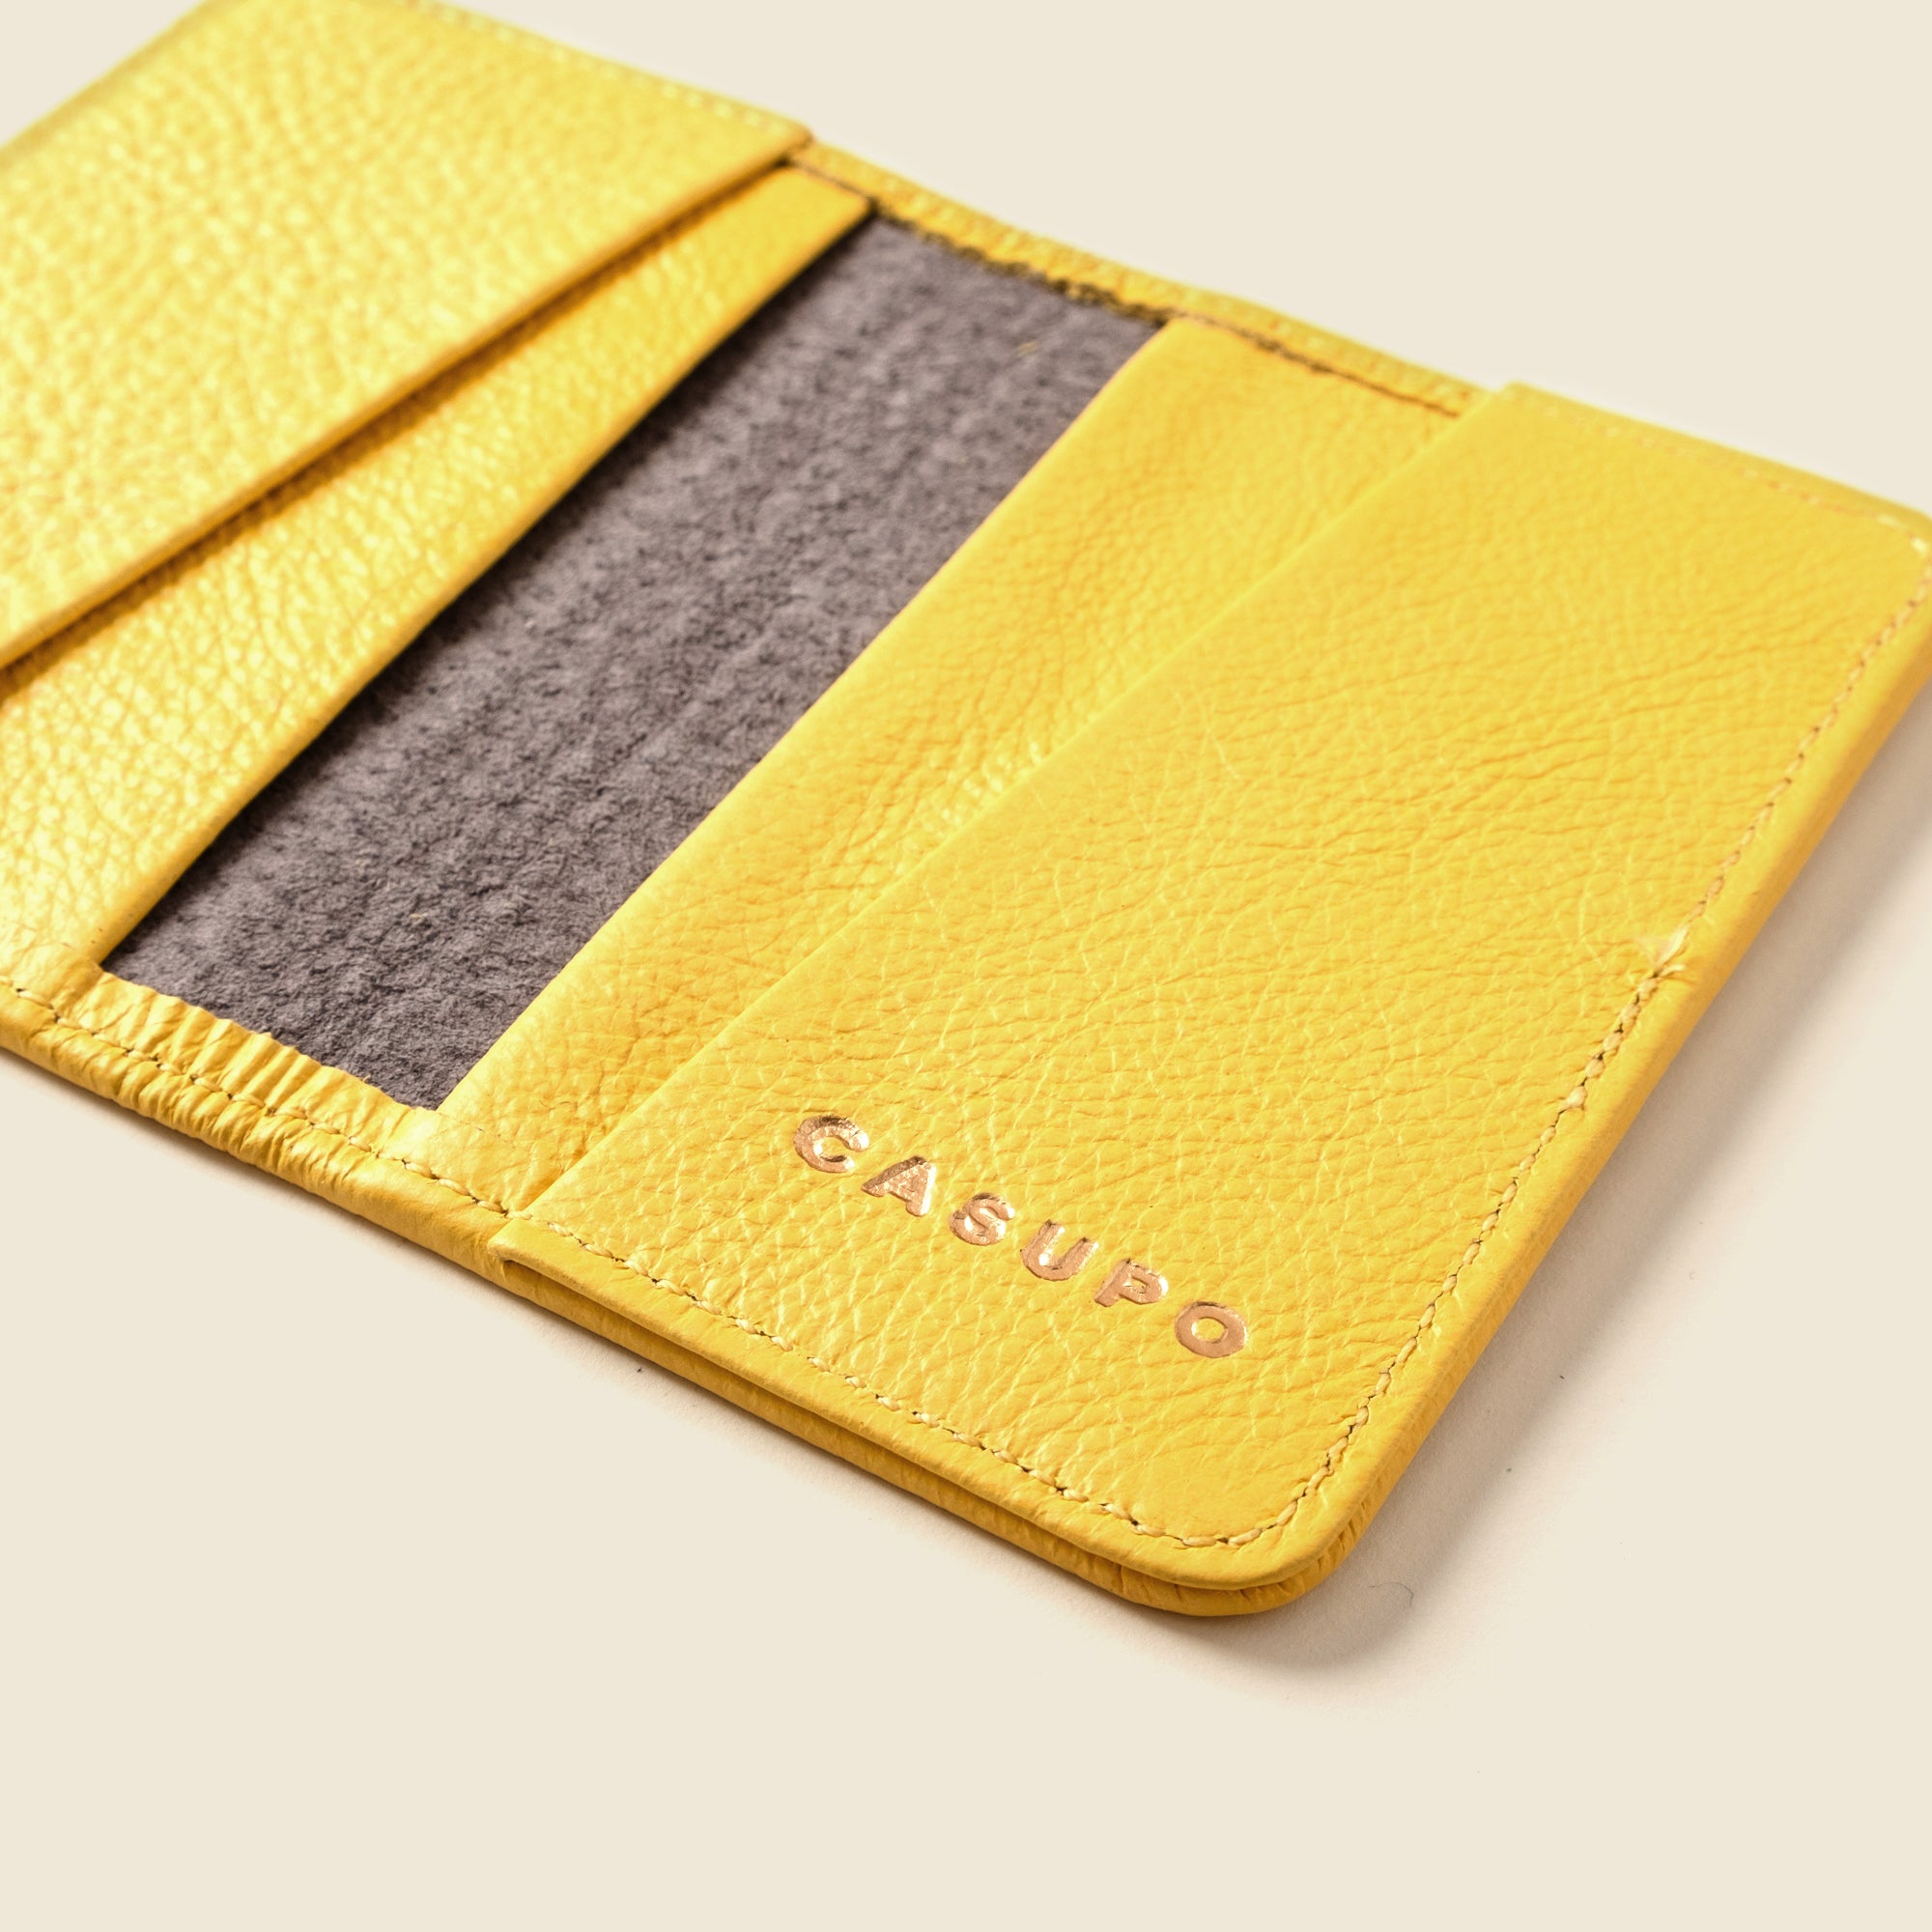 bright yellow leather bifold wallet from Casupo for men